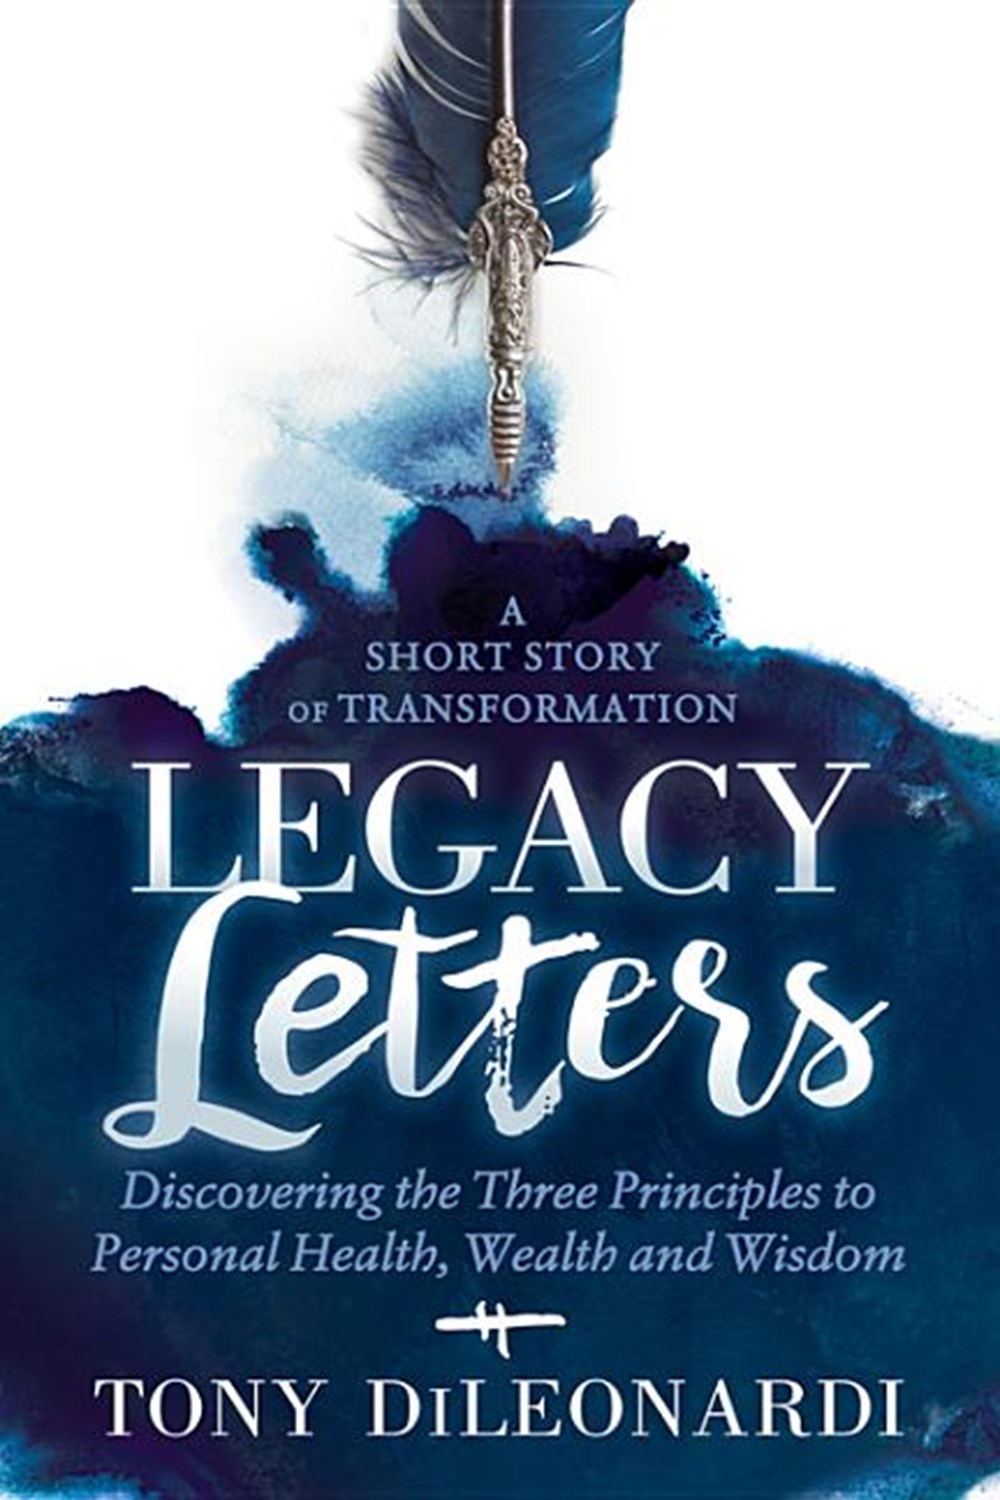 Legacy Letters: - A Novel - A Short Story of Transformation